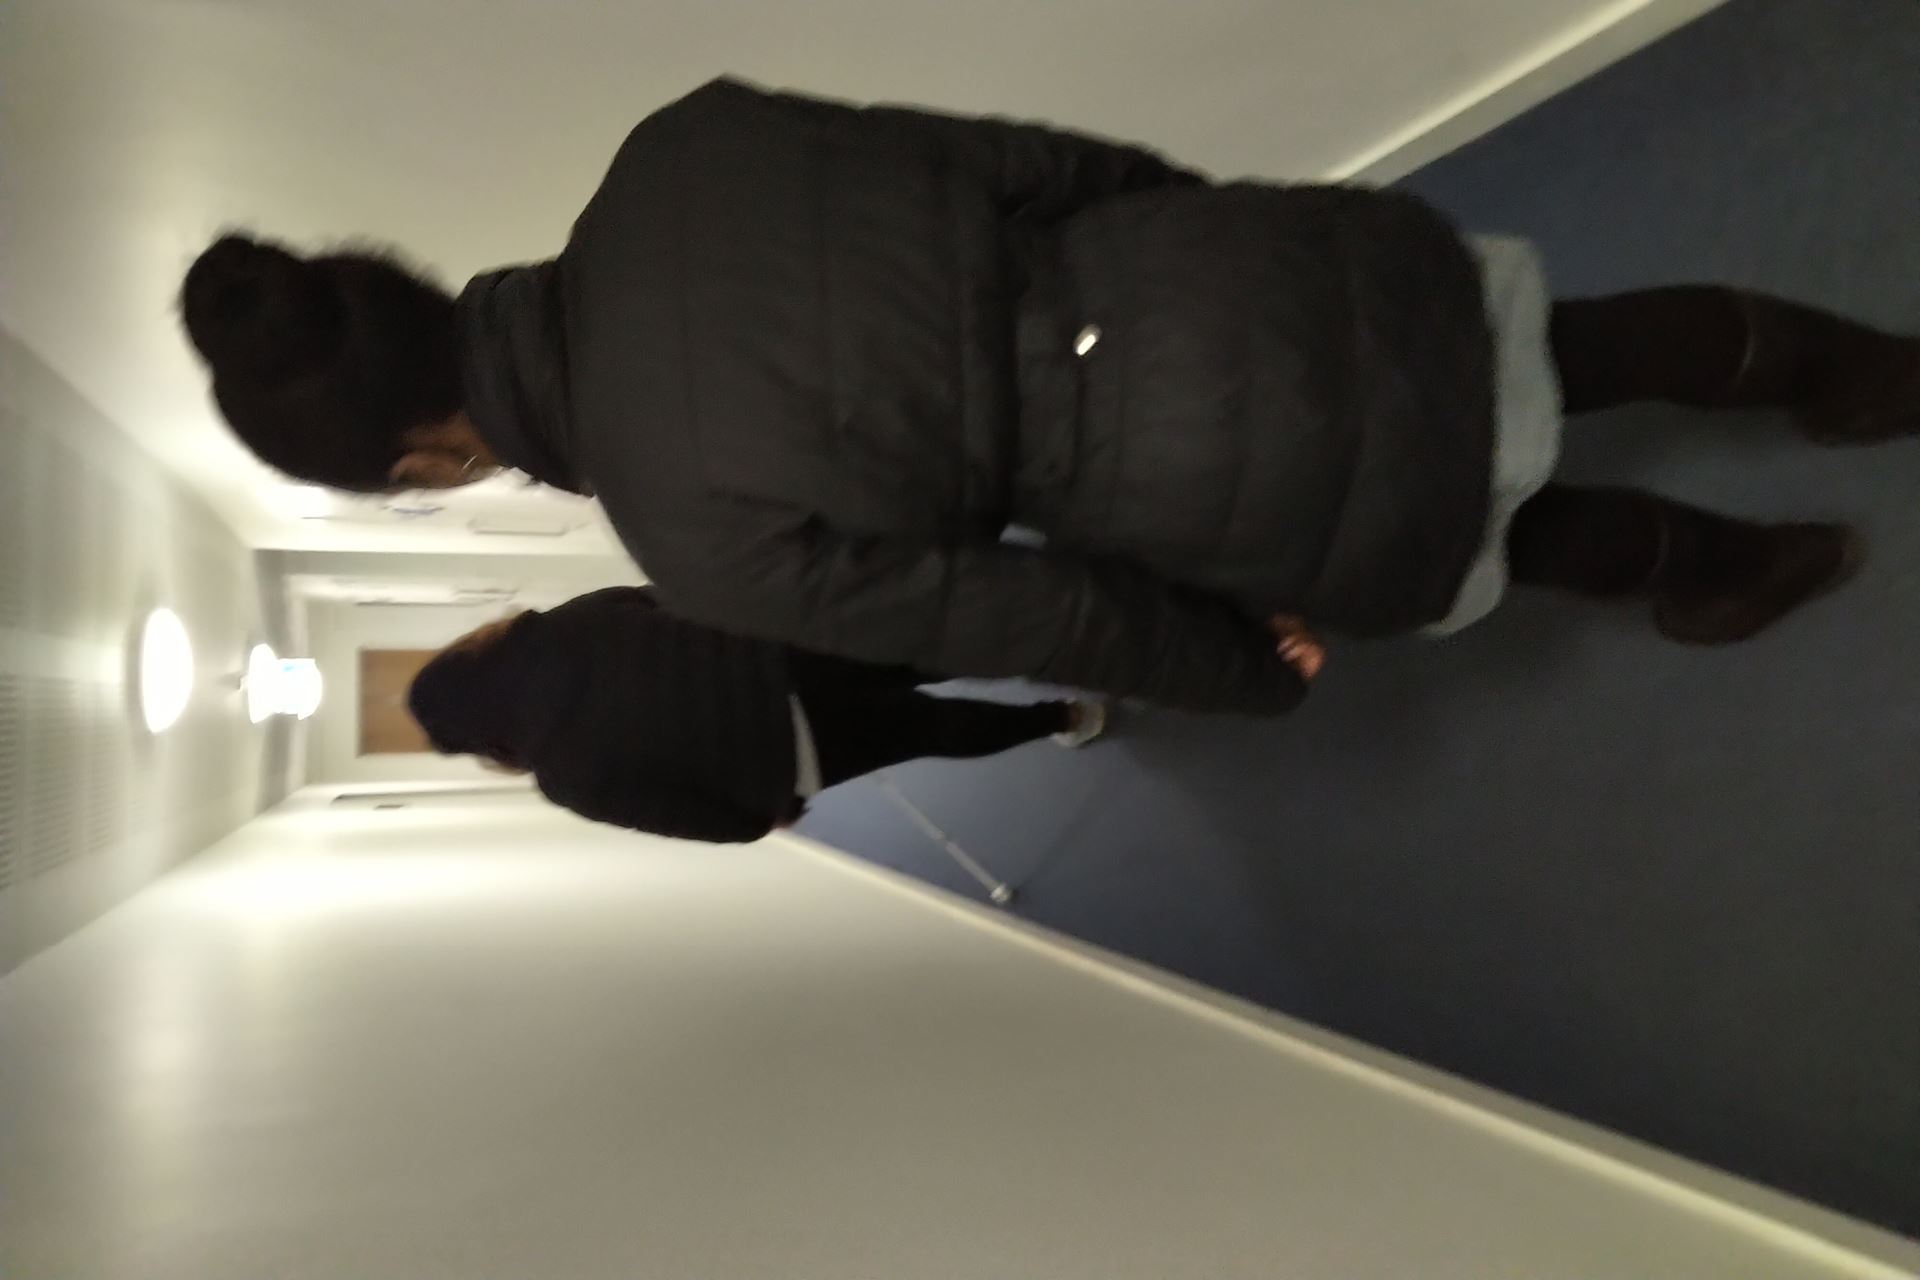 image of VRS walking behind a client along a corridor, teaching long cane